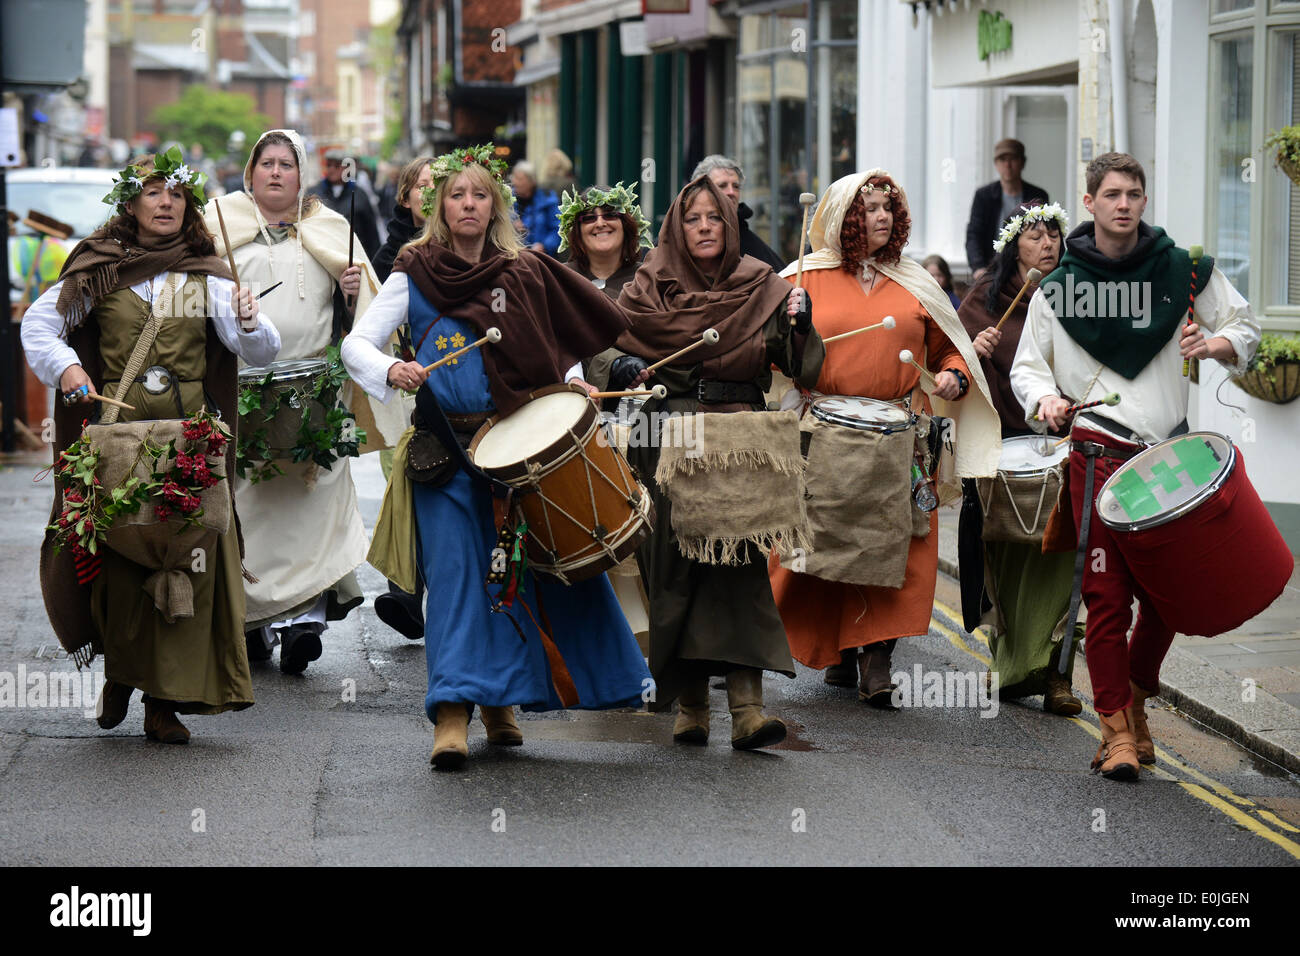 A group of people dressed in costumes and celebrating the Battle of Lewes in Lewes High Street, East Sussex, UK. Stock Photo